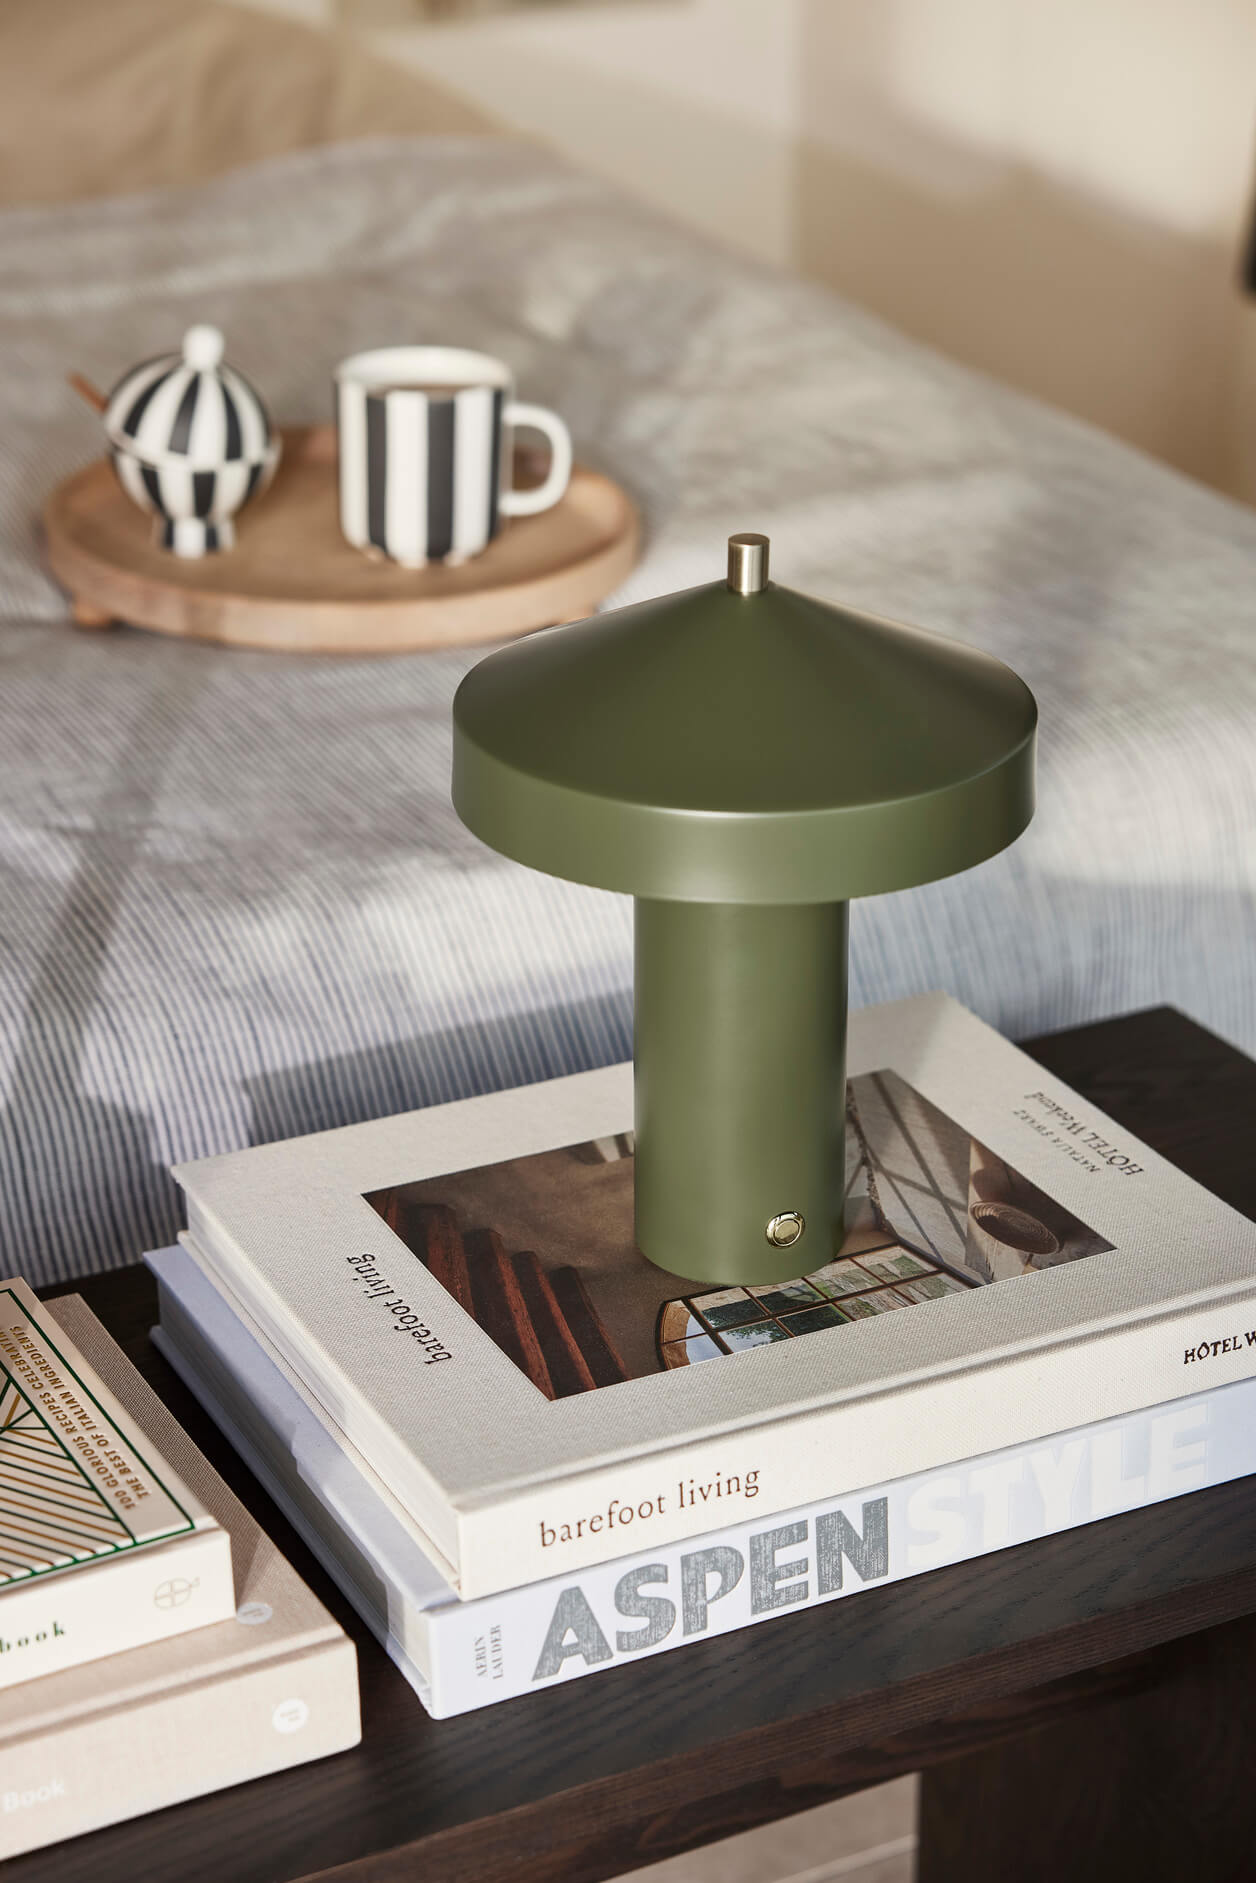 OYOY LIVING Hatto Table Lamp LED (EU) Table Lamp 706 Olive